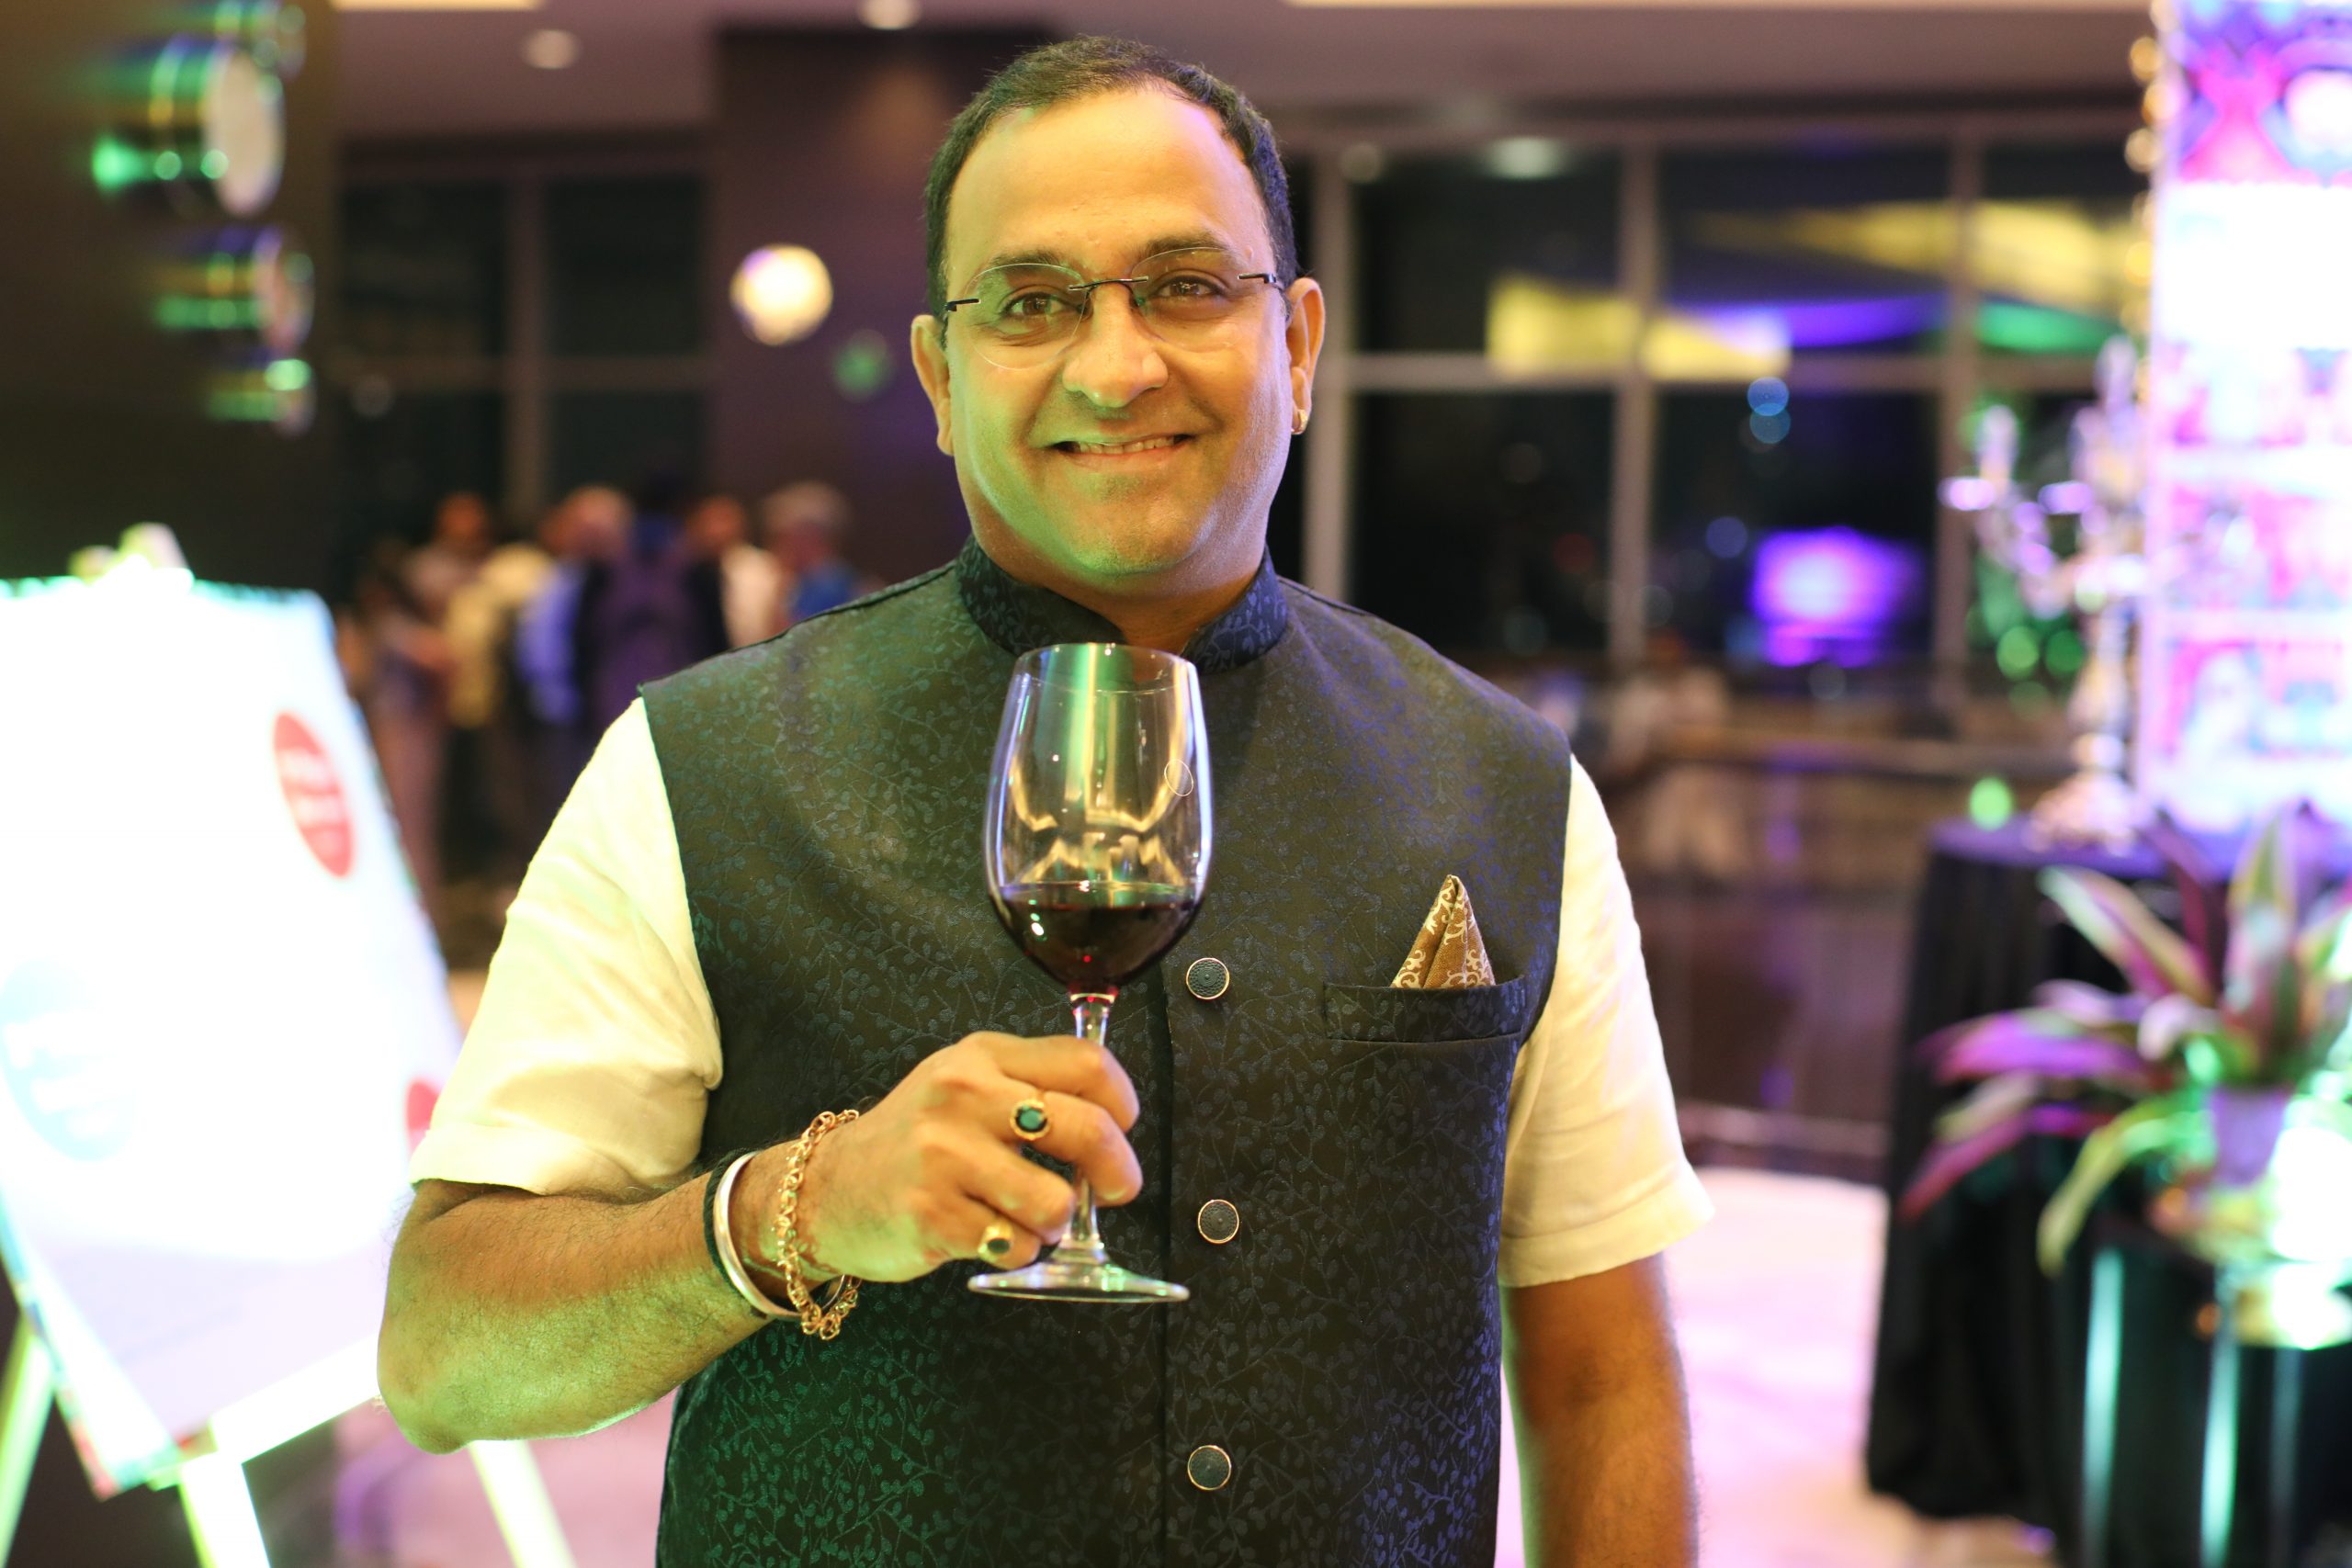 Indian wine has improved in quality in leaps and bounds: Kishan Pedhapally of Asav Vineyards 25